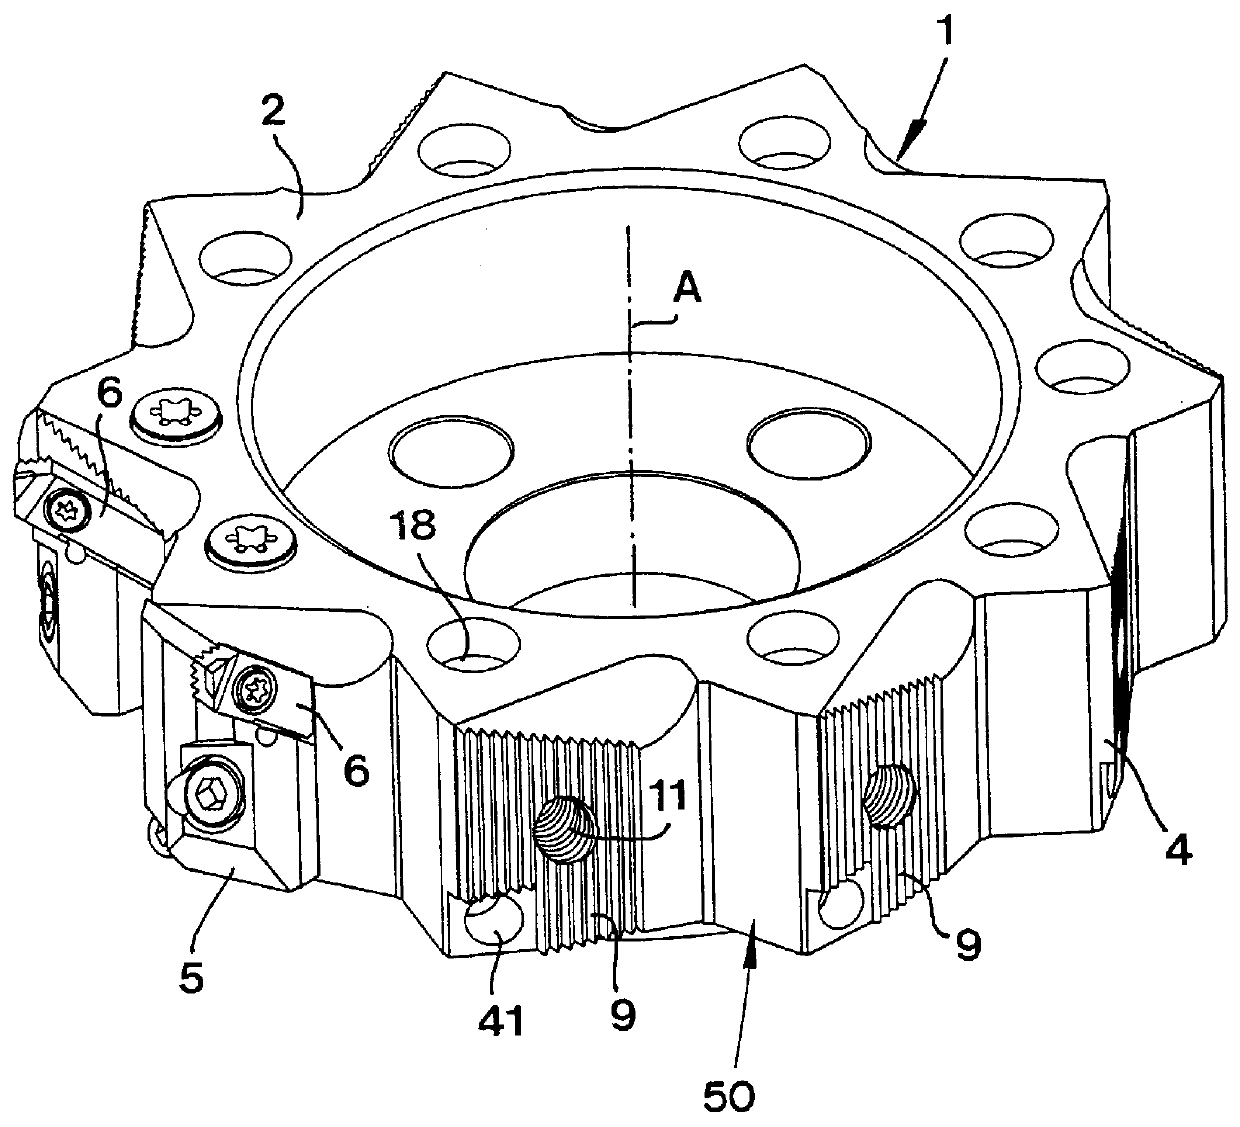 Milling tool having cassette-mounted inserts attached to a rotary supporting body